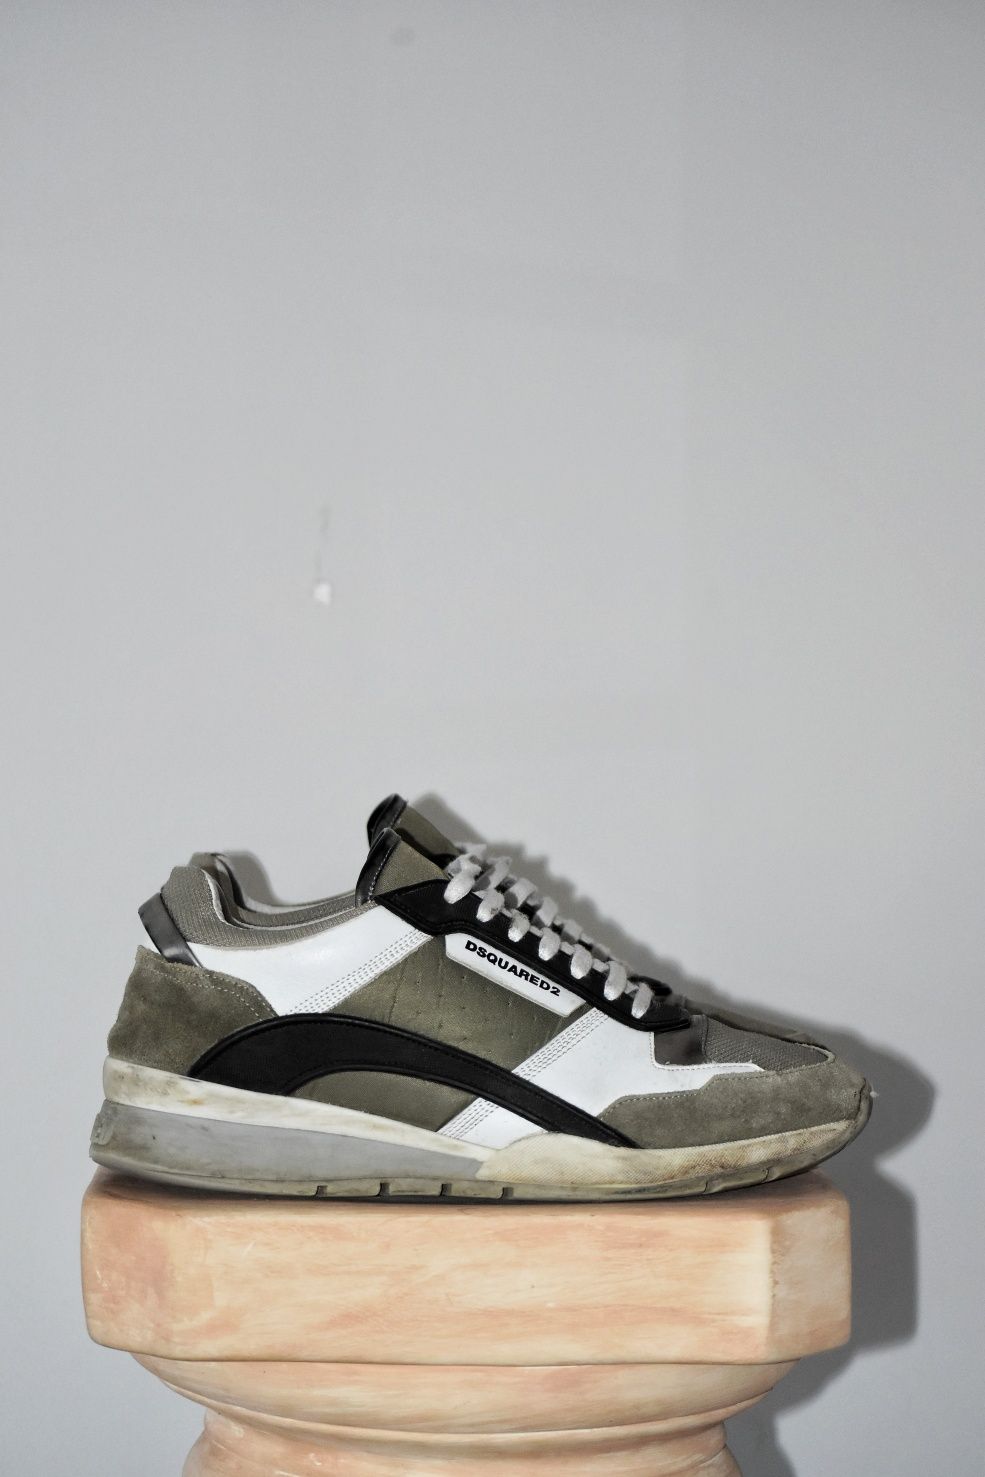 Dsquared2 Sneakers Size 40